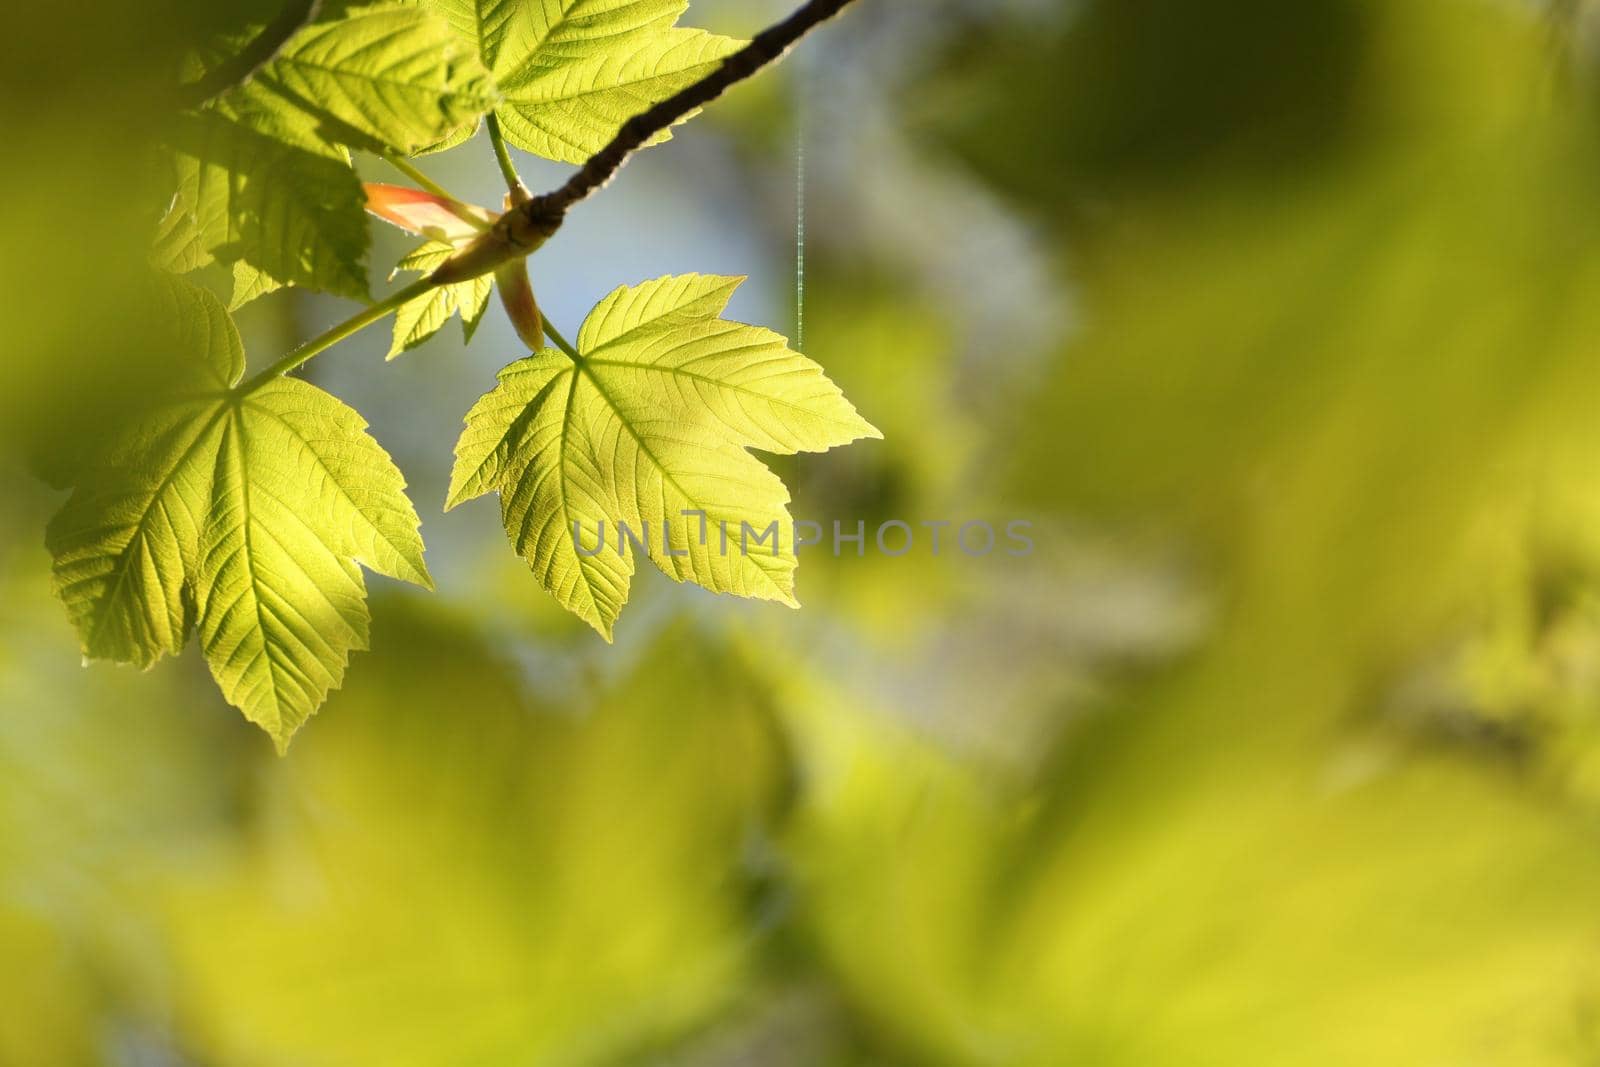 Sycamore maple leaves by nature78